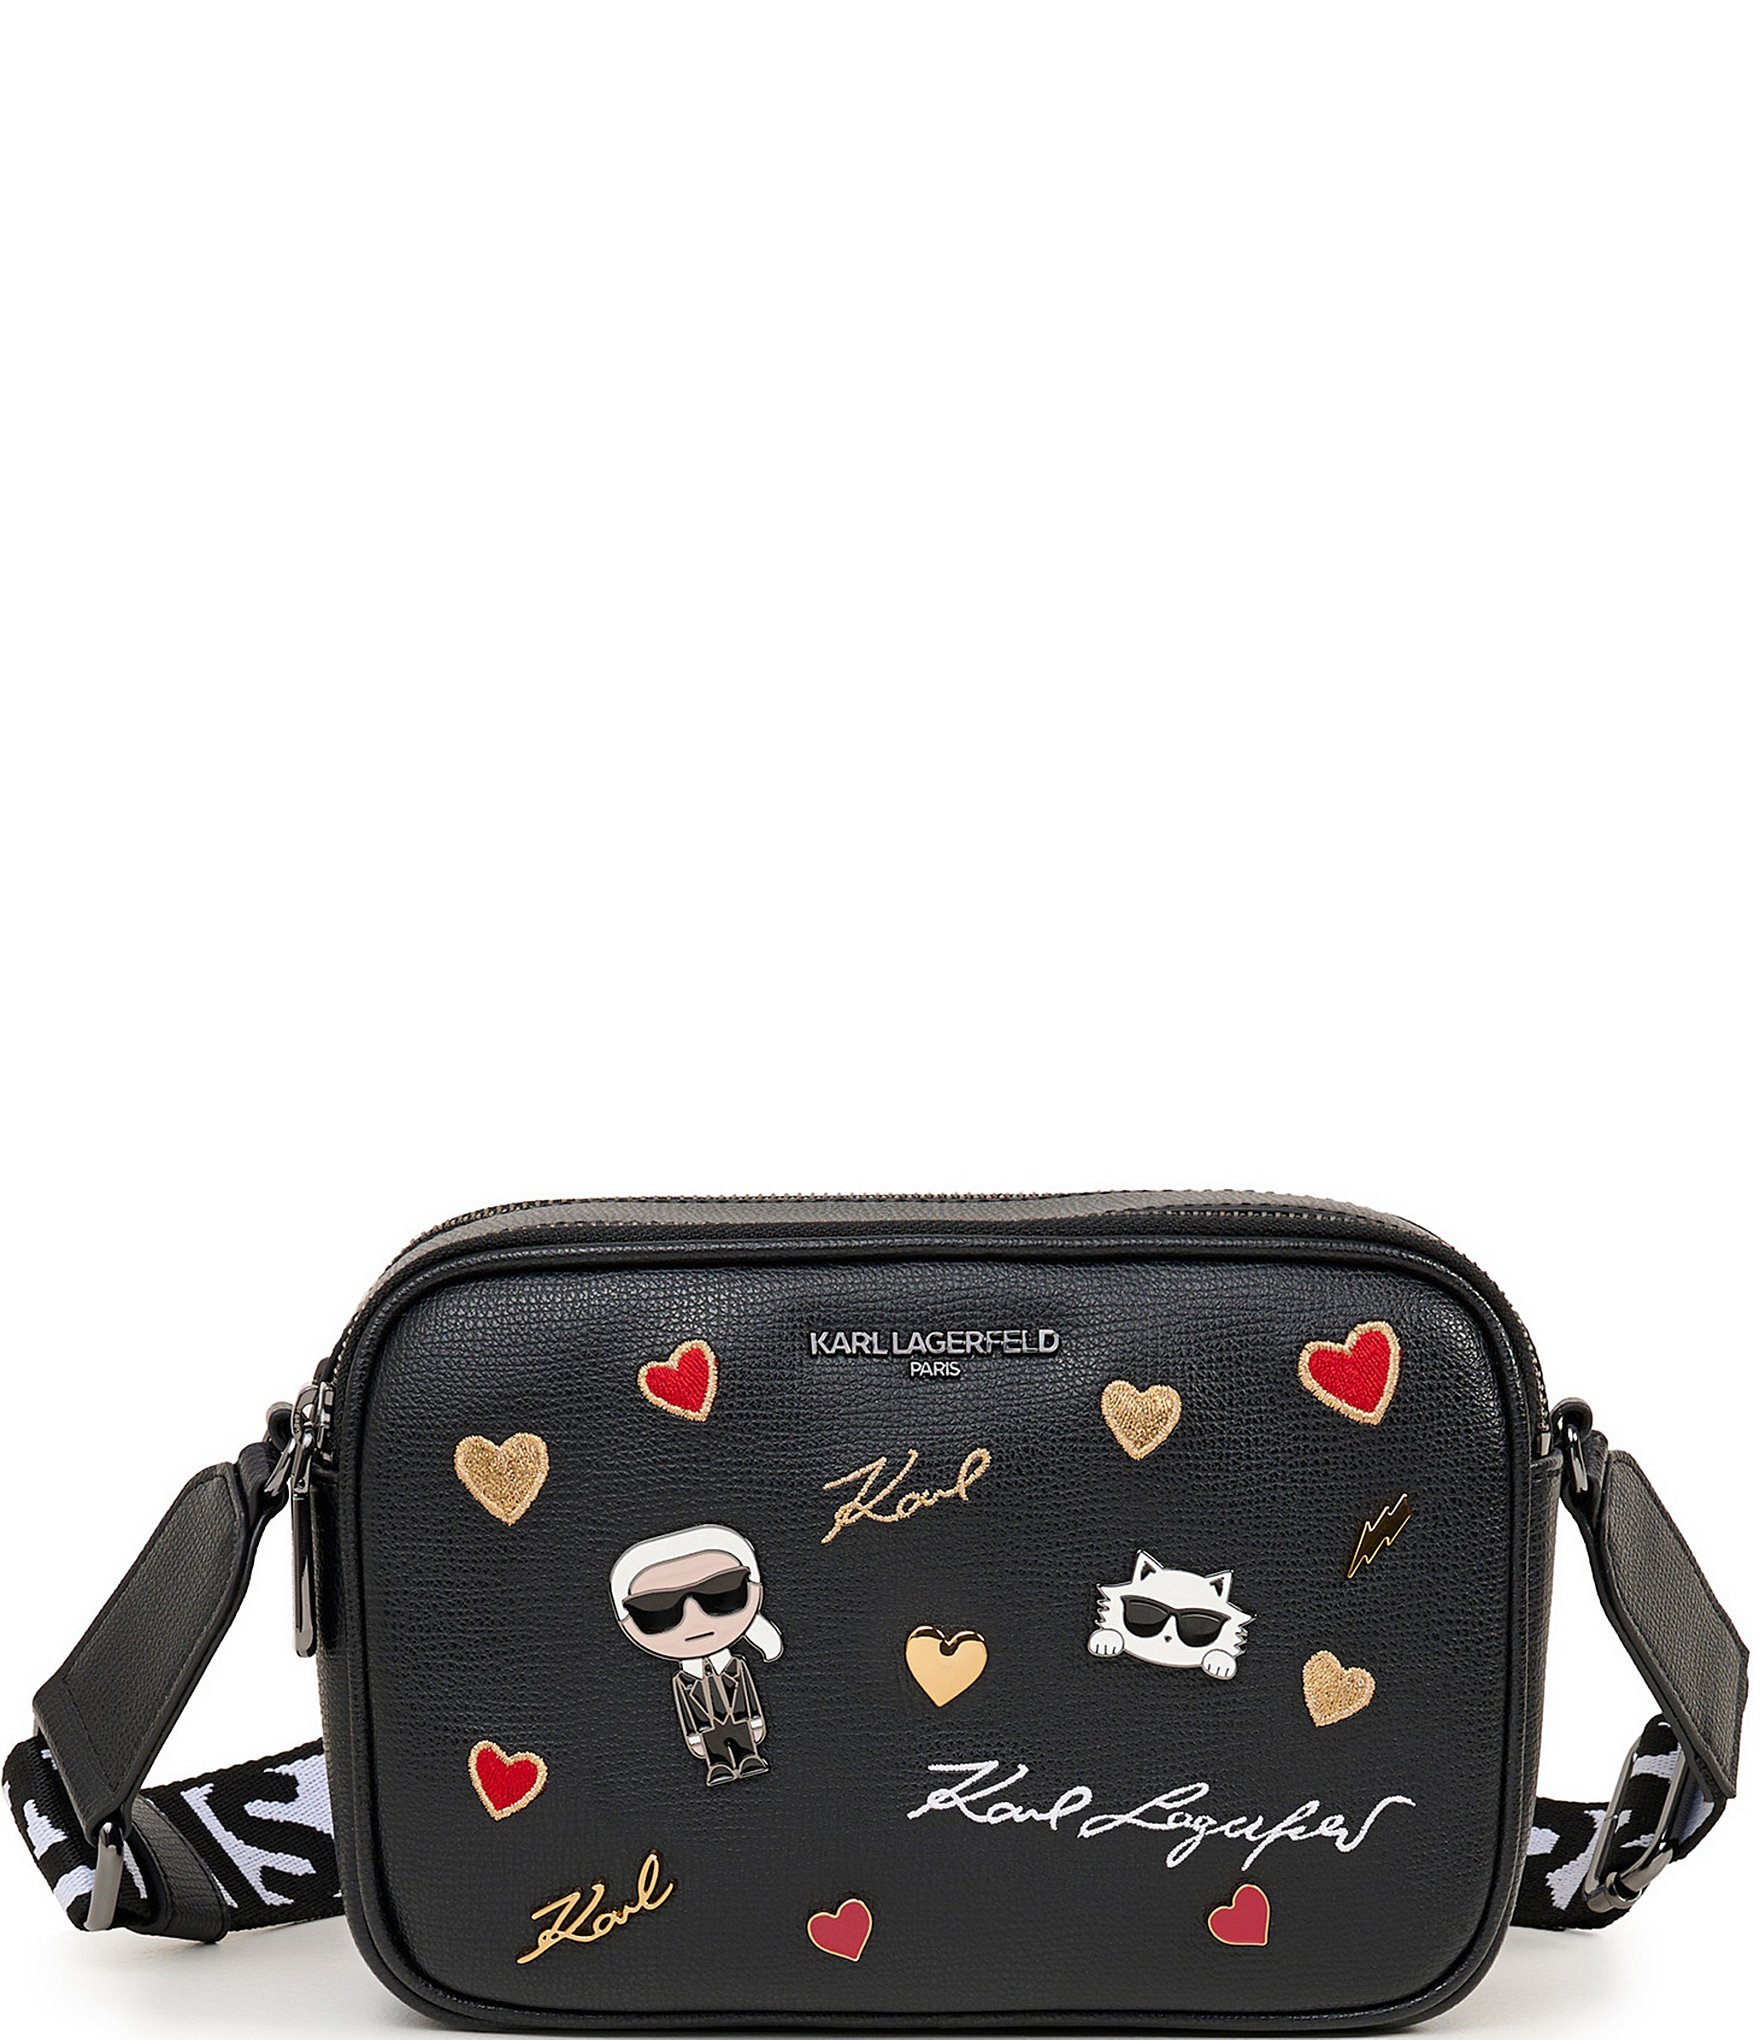 Karl Lagerfeld Paris Women's Maybelle SLG Cosmetic Bag | Amazon price  tracker / tracking, Amazon price history charts, Amazon price watches,  Amazon price drop alerts | camelcamelcamel.com